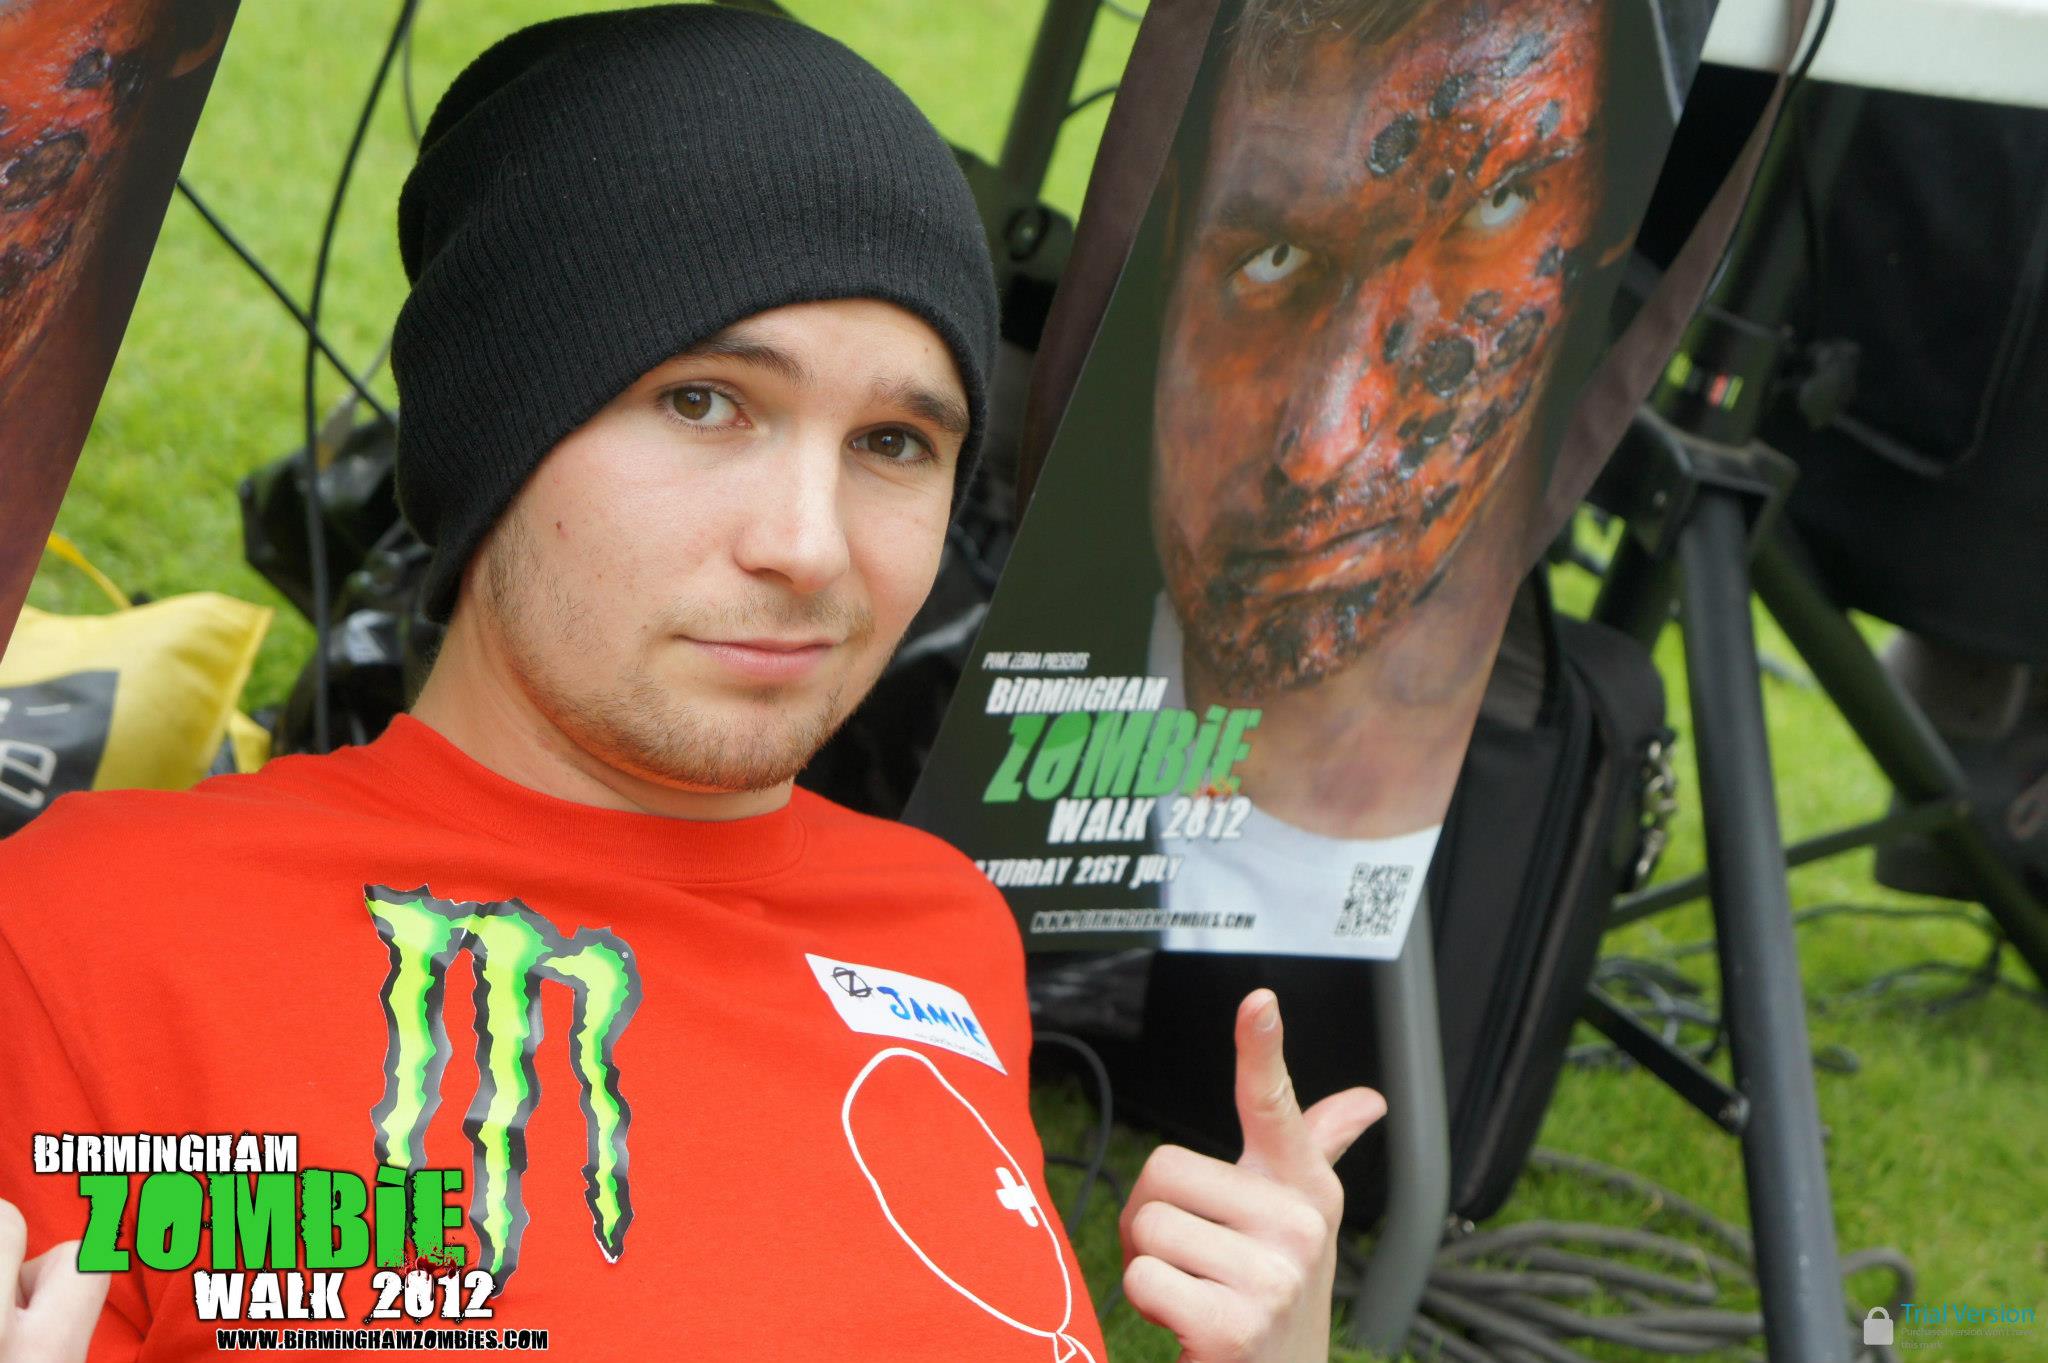 Birmingham Zombies founder Jamie Chapman poses with a poster bearing his face in 2012 (Photograph: Adam Yosef)